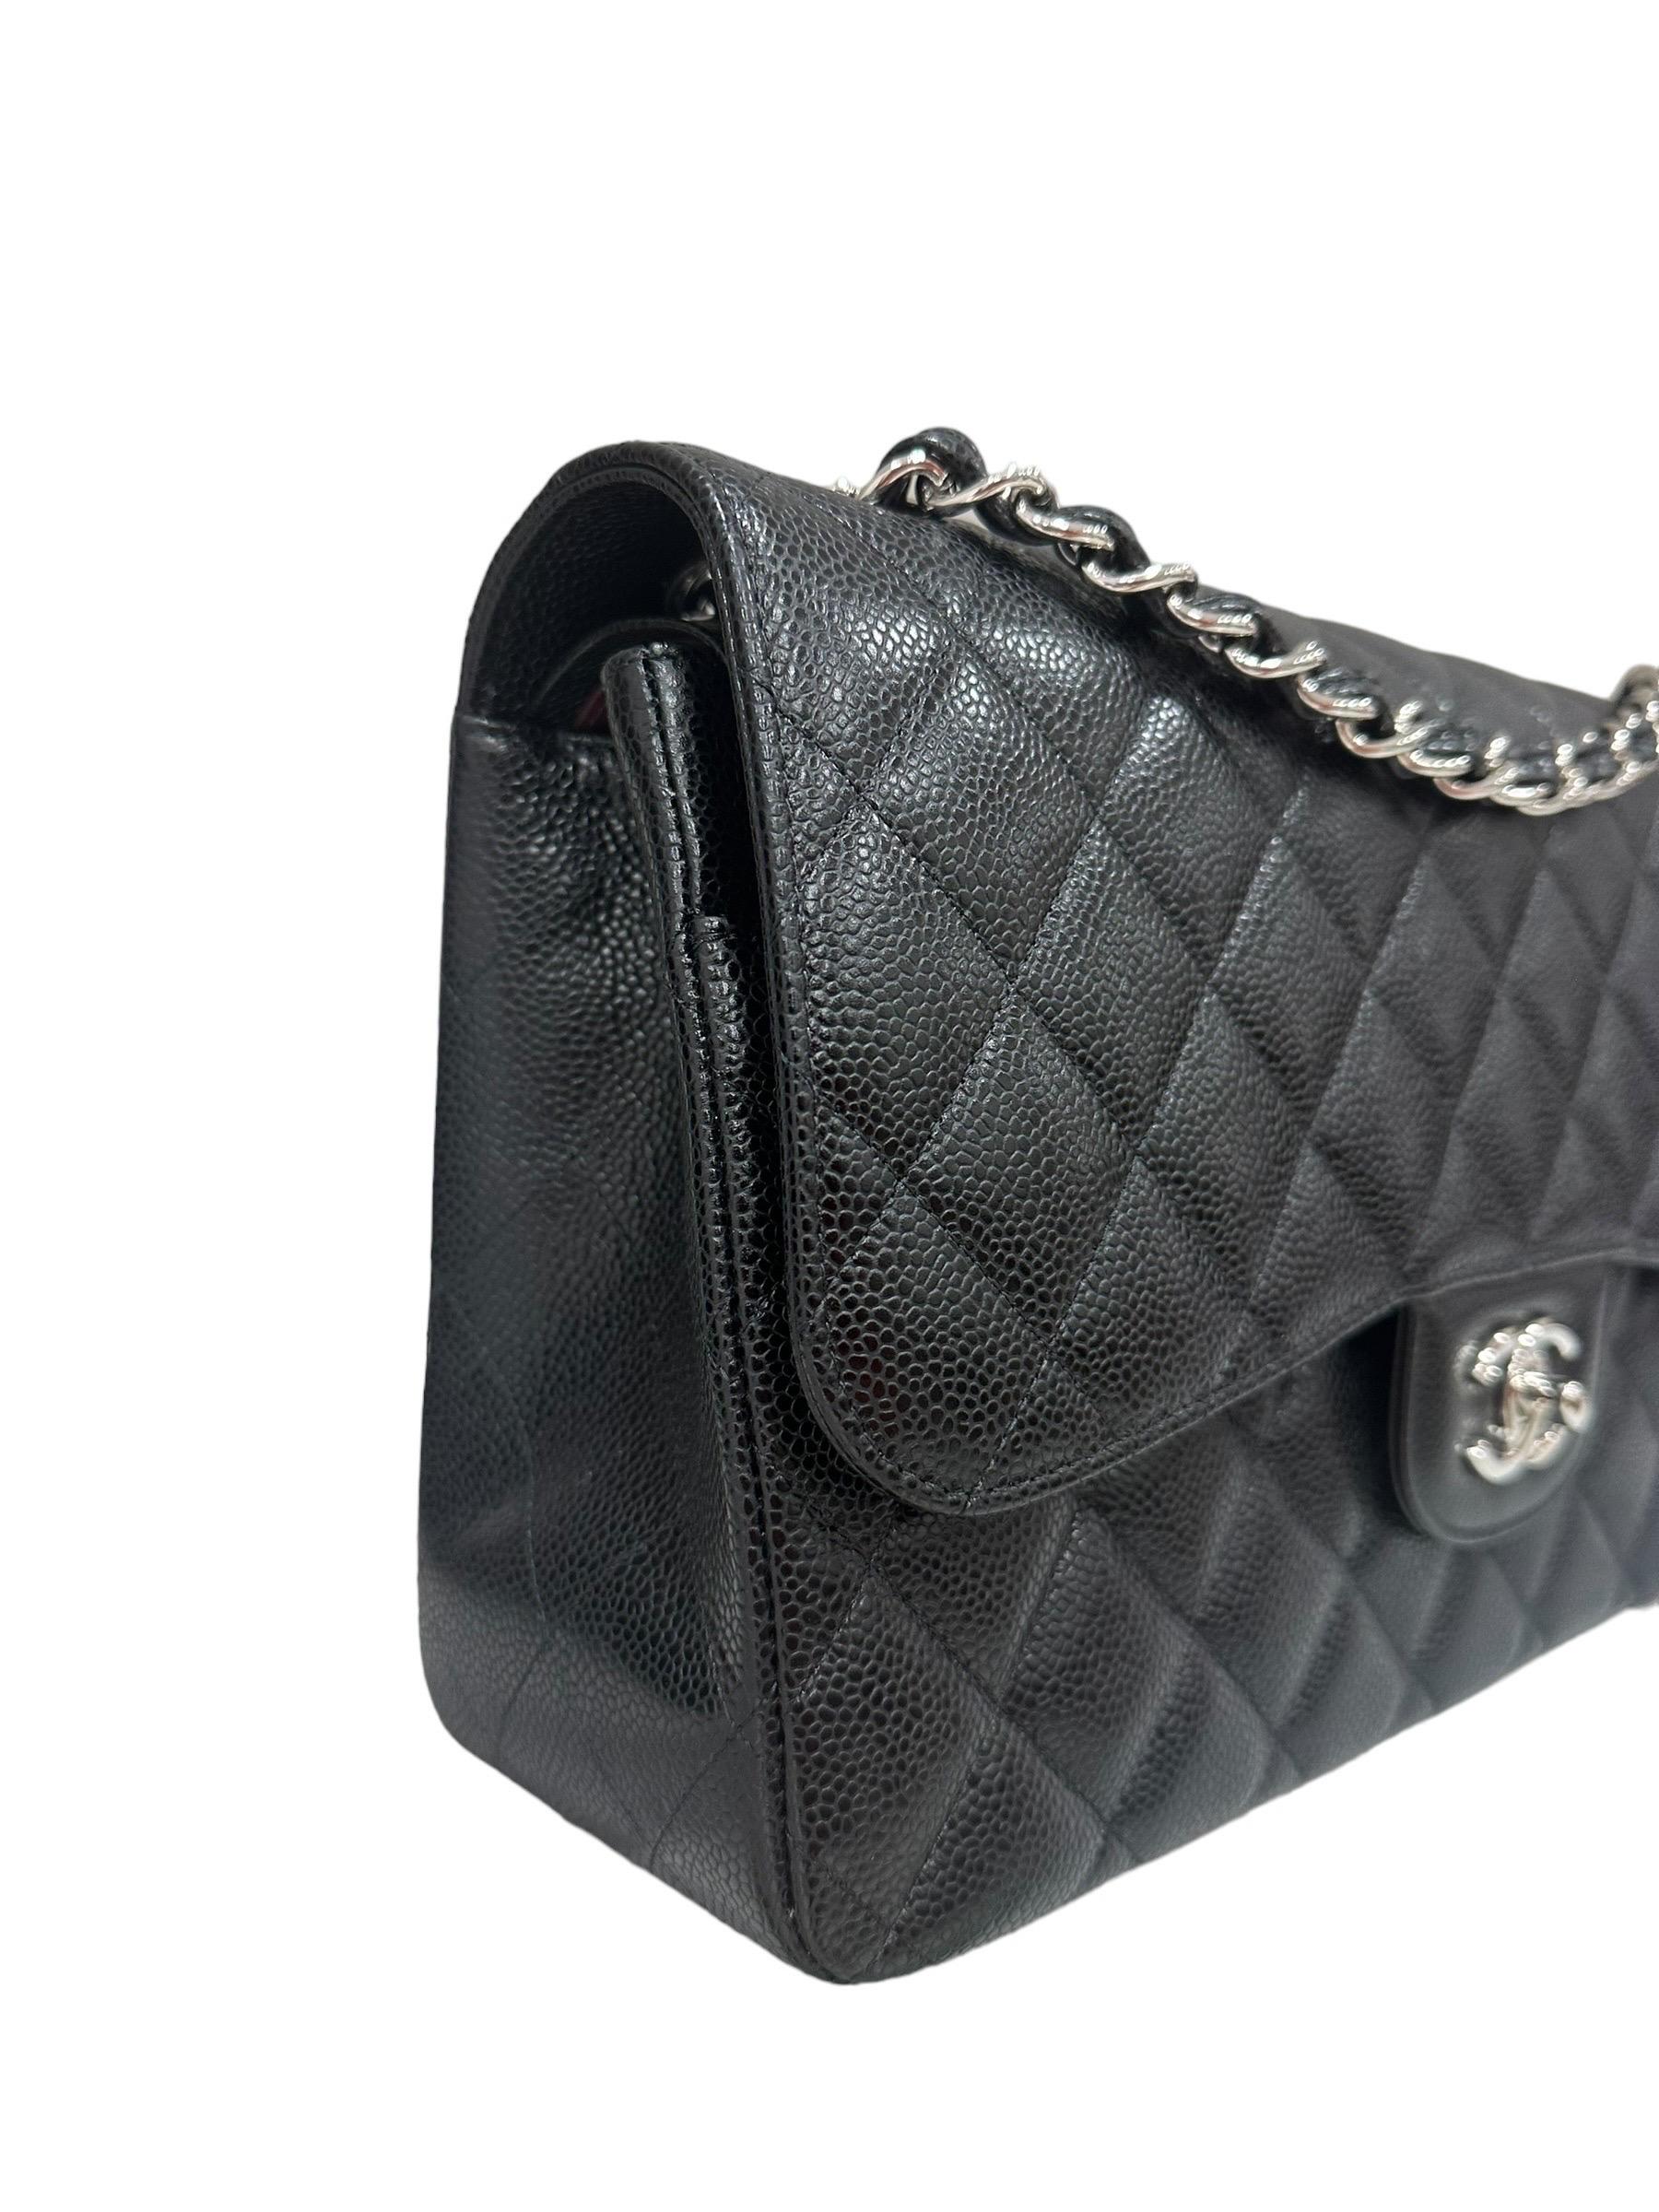 2023 Chanel Timeless Jumbo Pelle Caviar Nera Borsa Tote In Excellent Condition For Sale In Torre Del Greco, IT